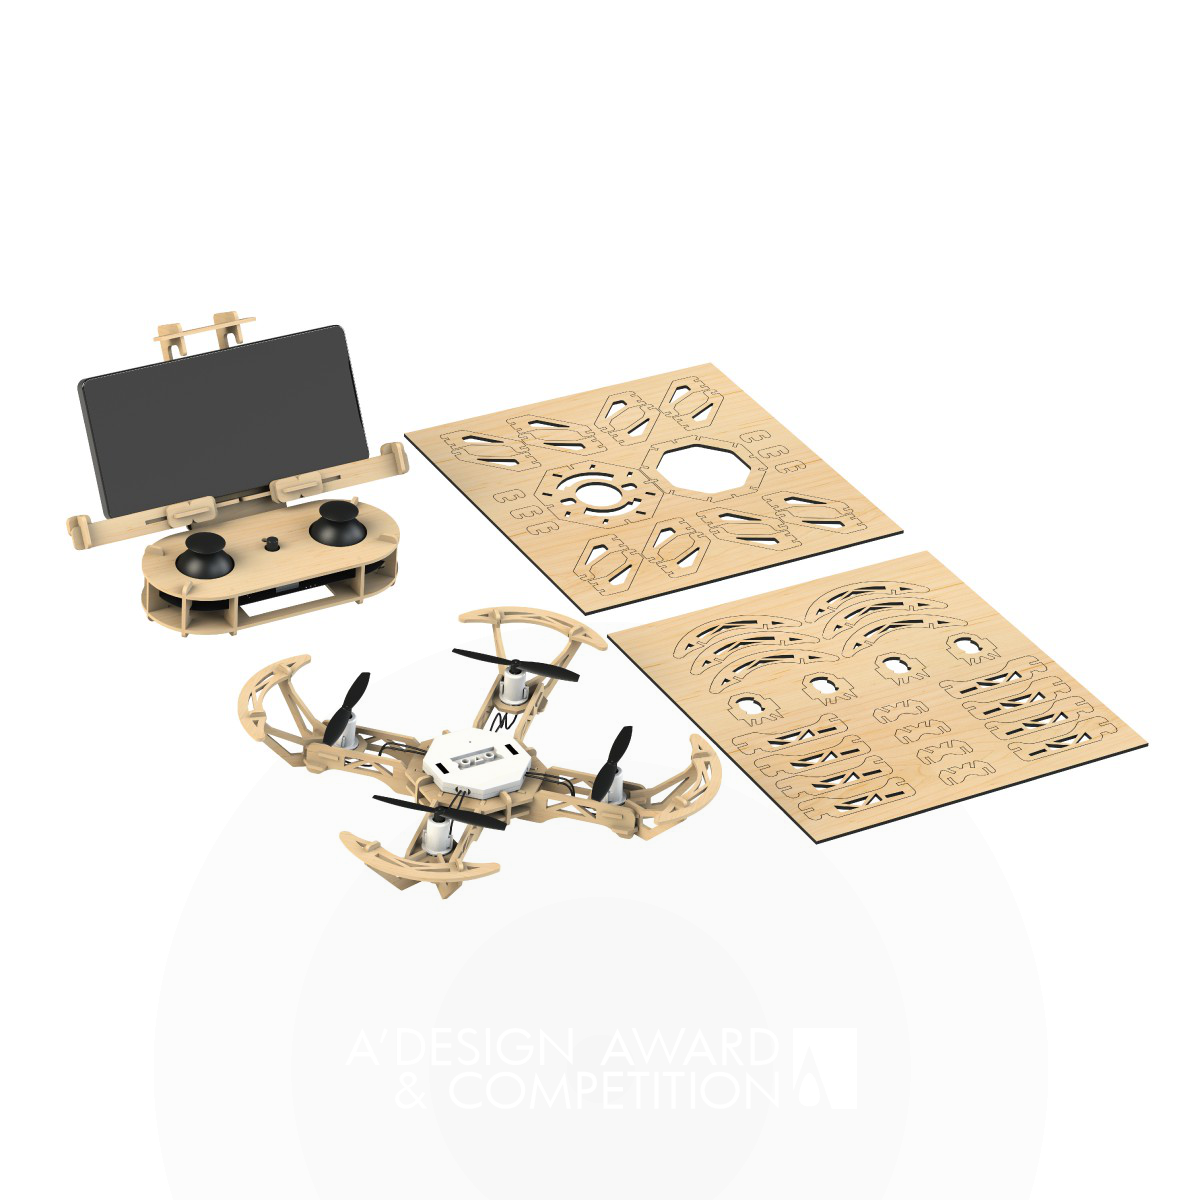 Airwood: The Multifunctional Wooden Drone